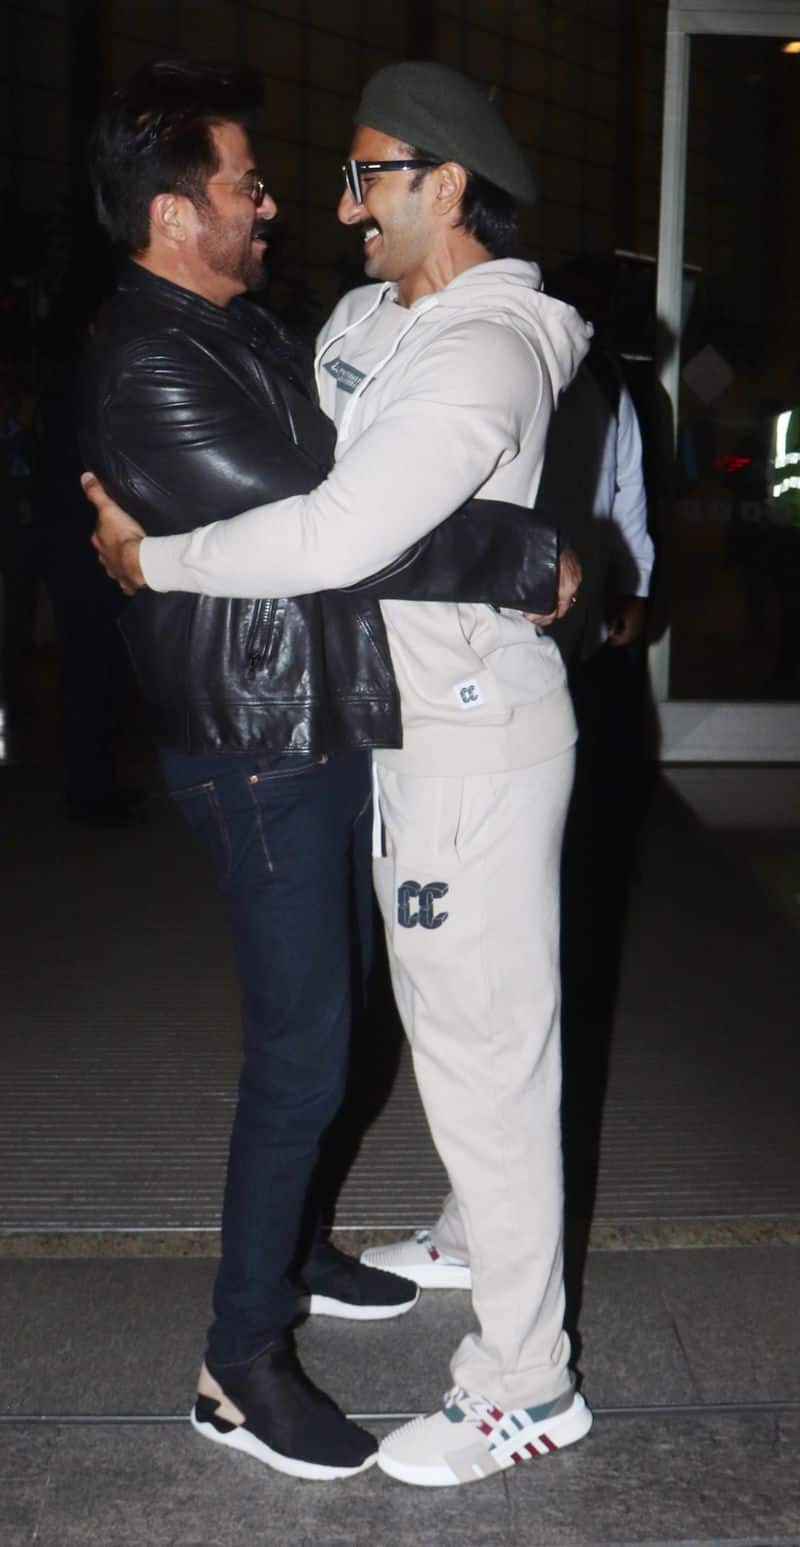 Actors Ranveer Singh and Anil Kapoor were recently spotted exchanging greetings at the Mumbai airport.